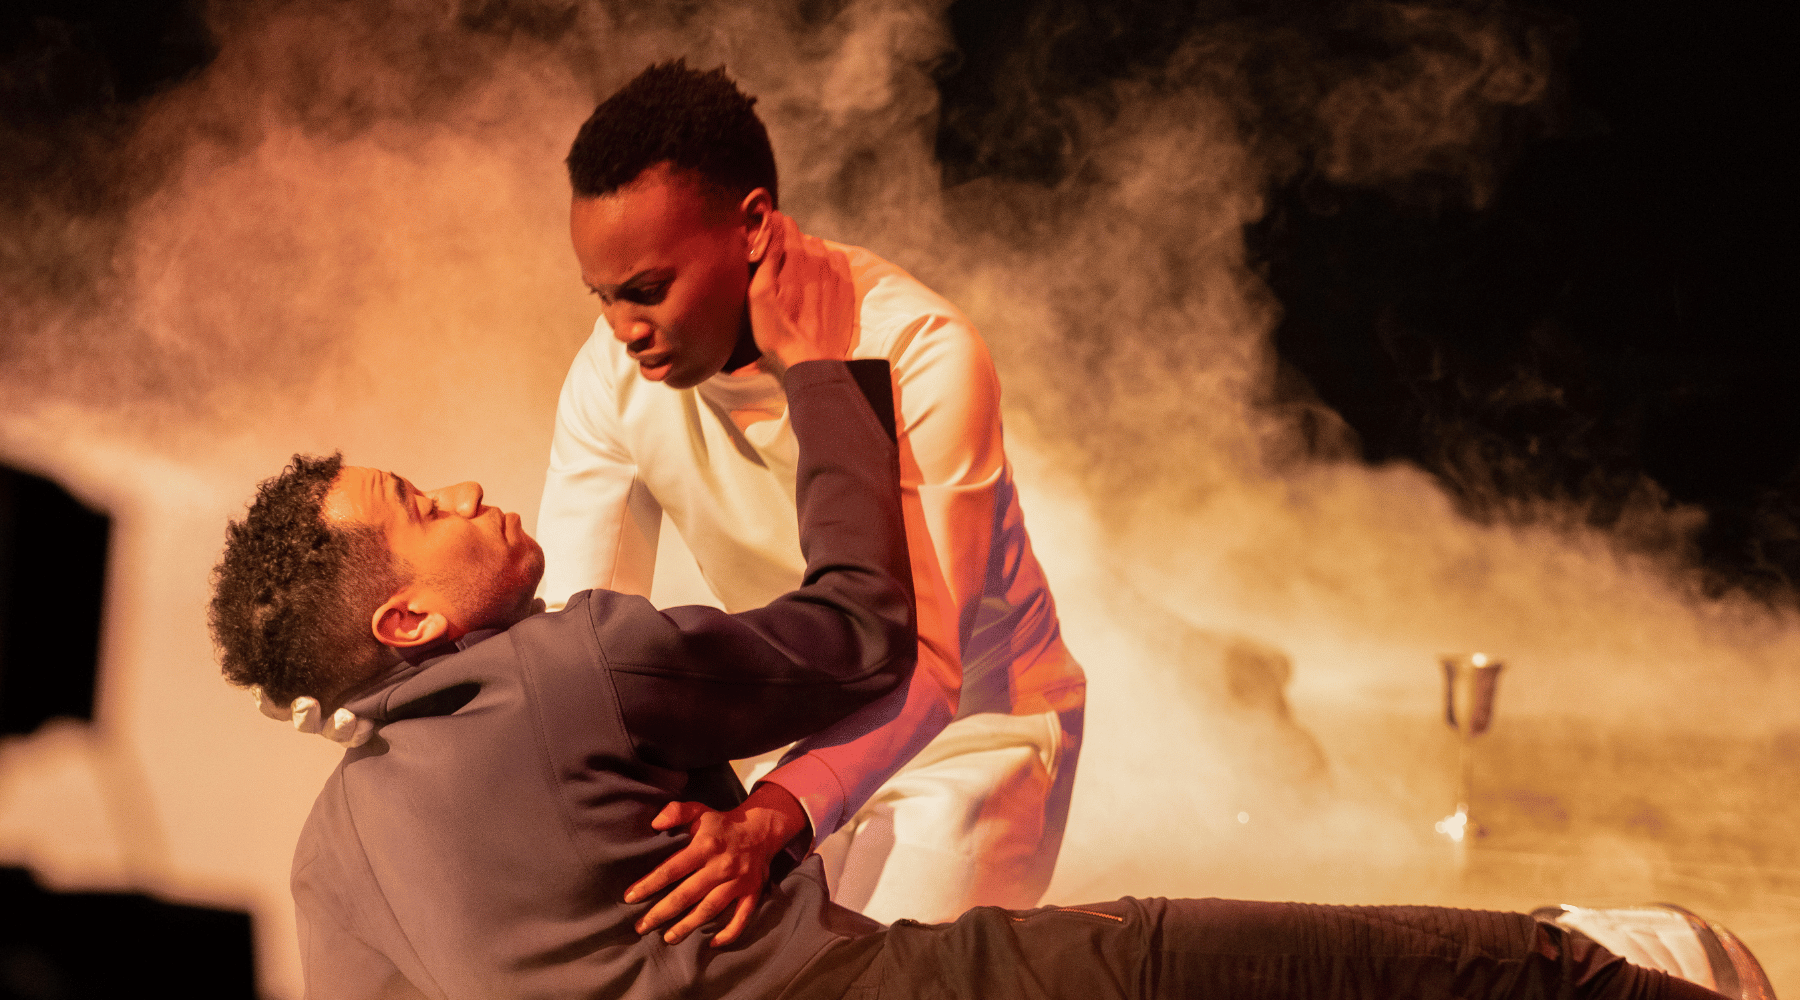 From left- Austin Eckert and Amaka Umeh in Hamlet. Photo by Jordy Clarke.